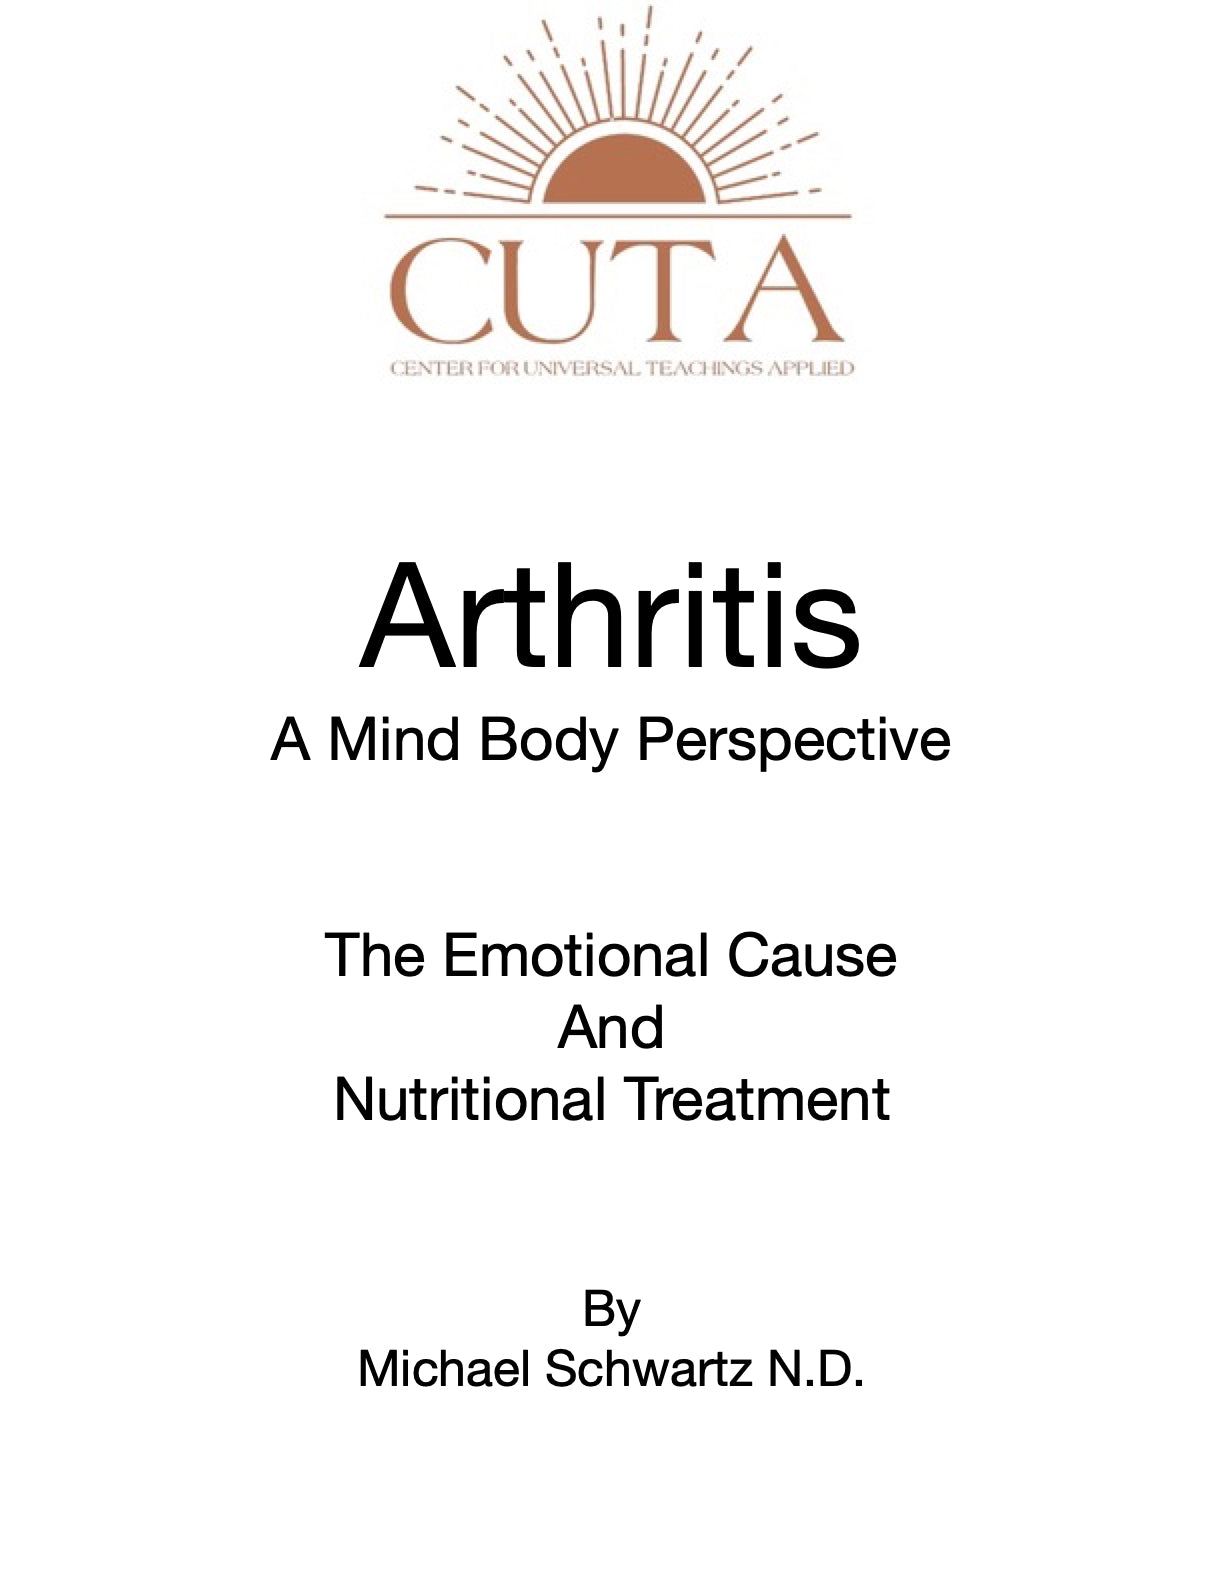 Arthritis and Inflammatory Issues Booklet